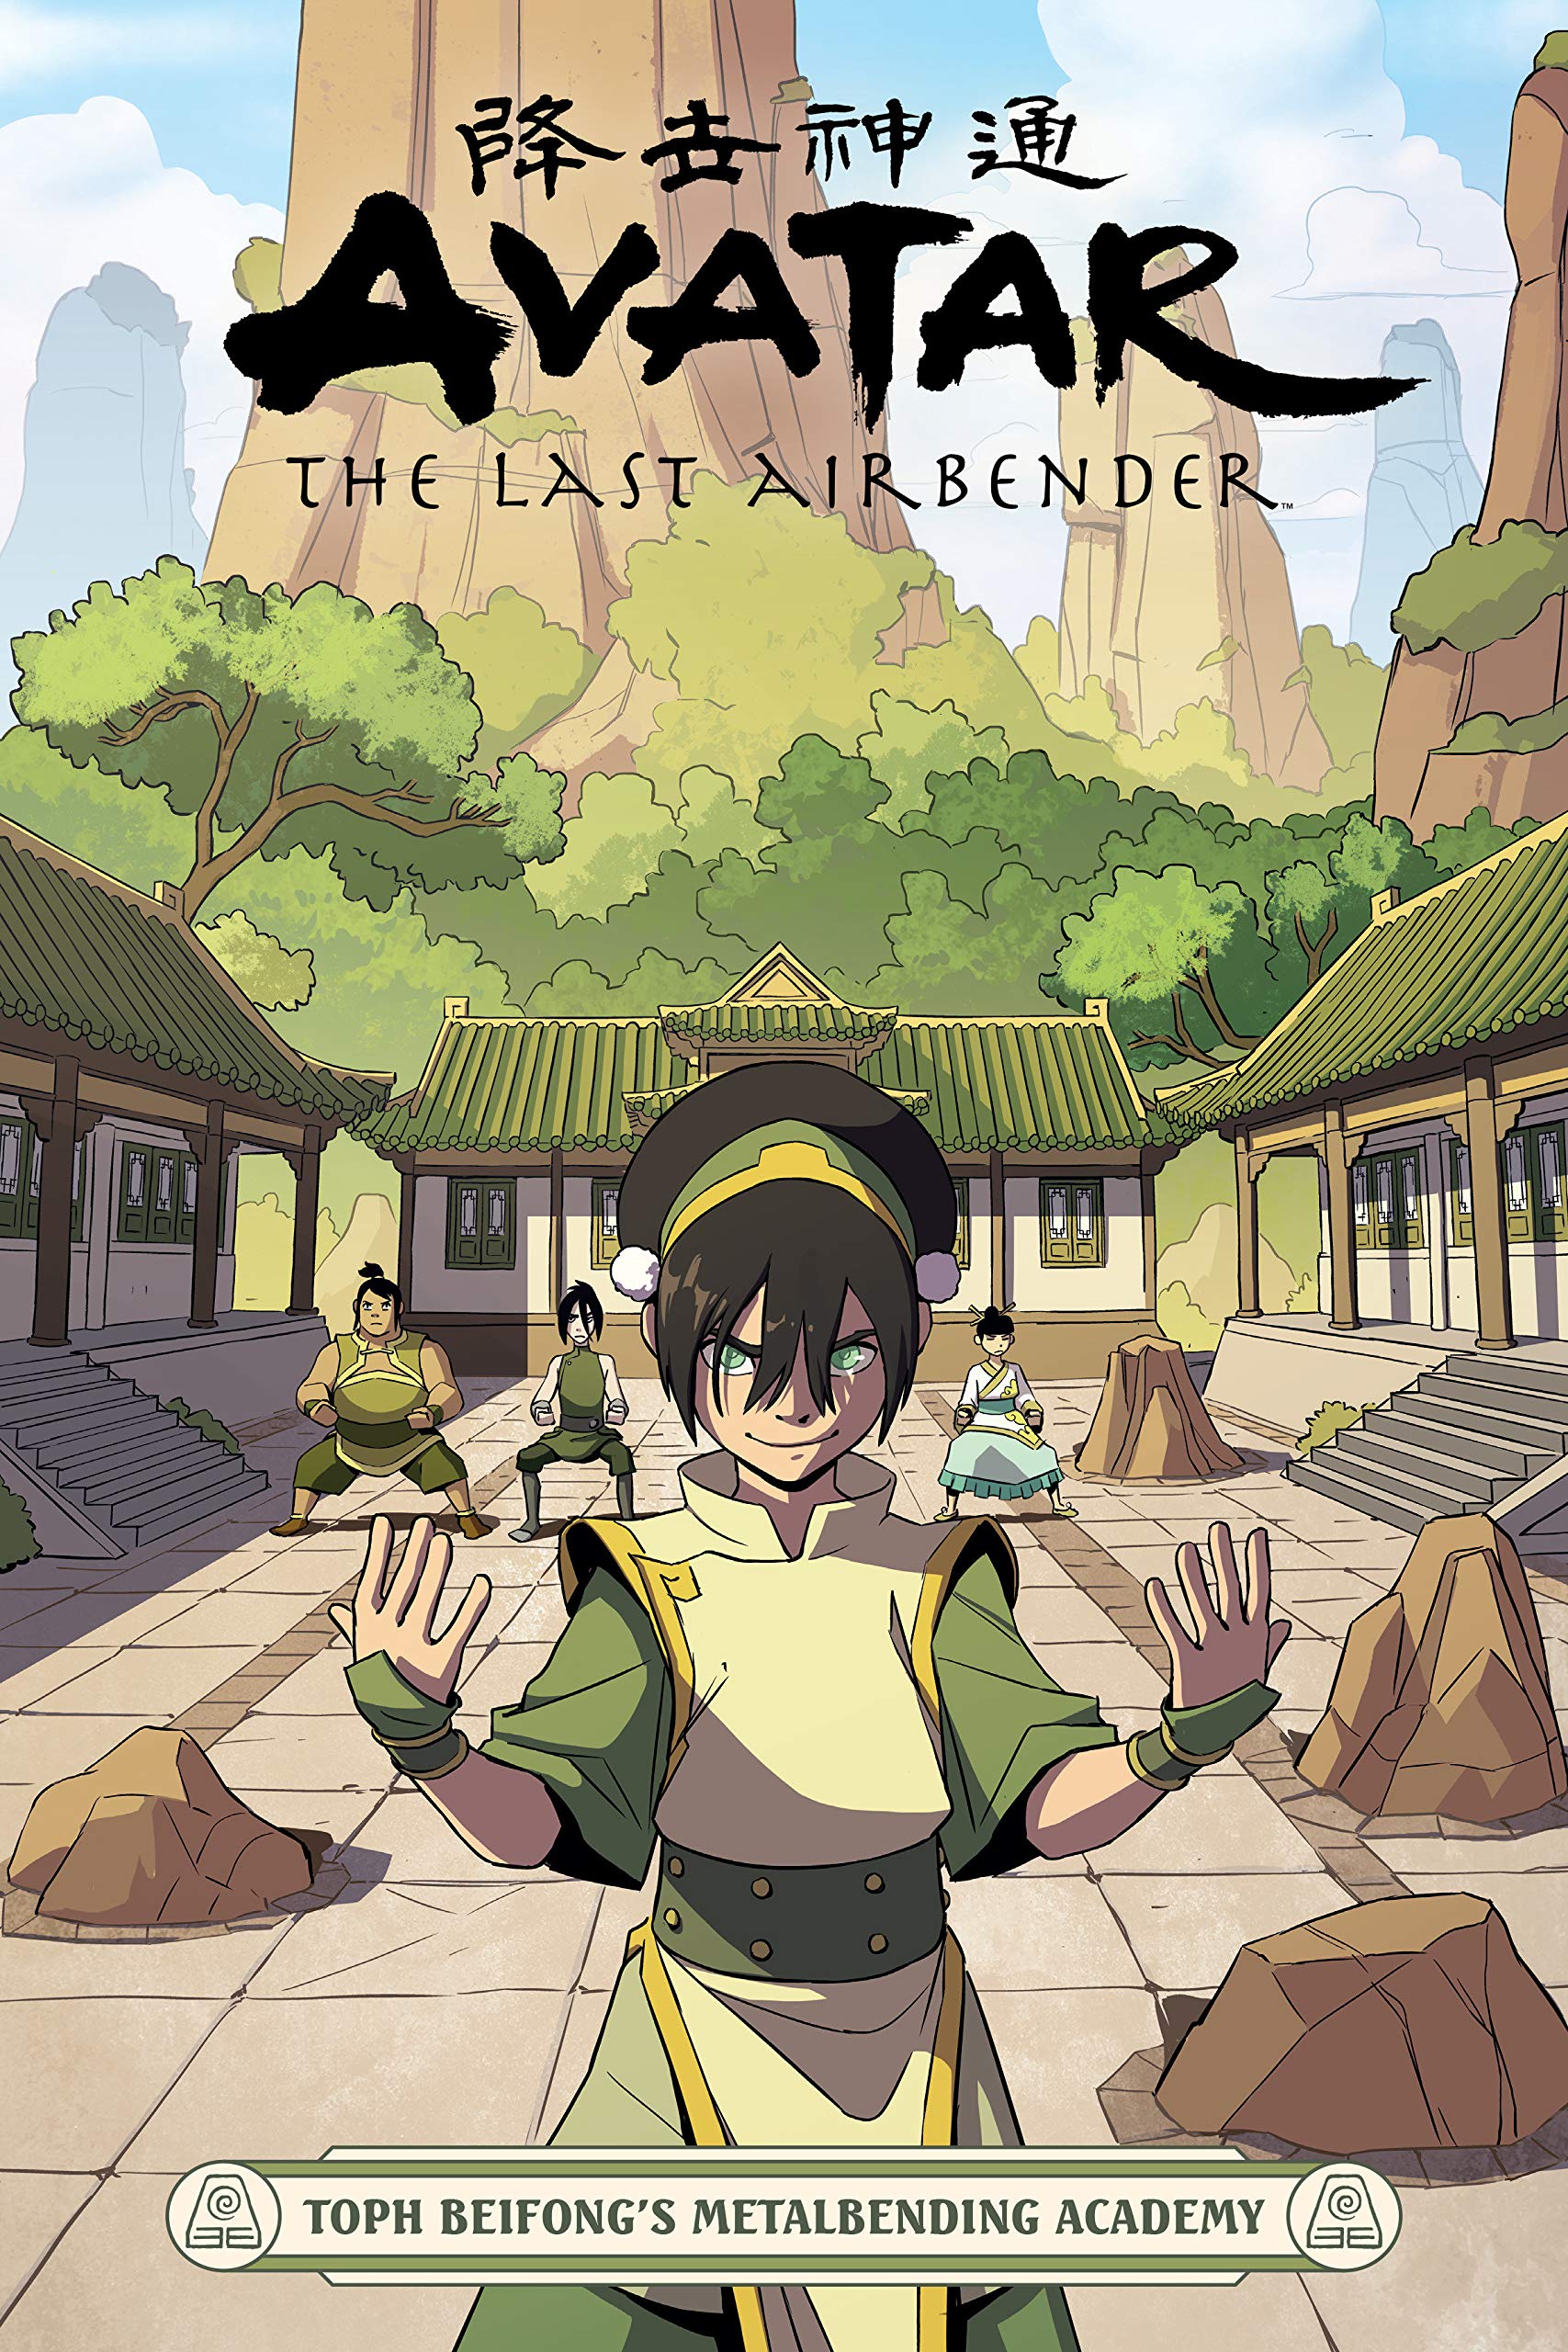 Toph Beifongs Complete Timeline in Avatar and Beyond   Avatar The Last  Airbender  YouTube